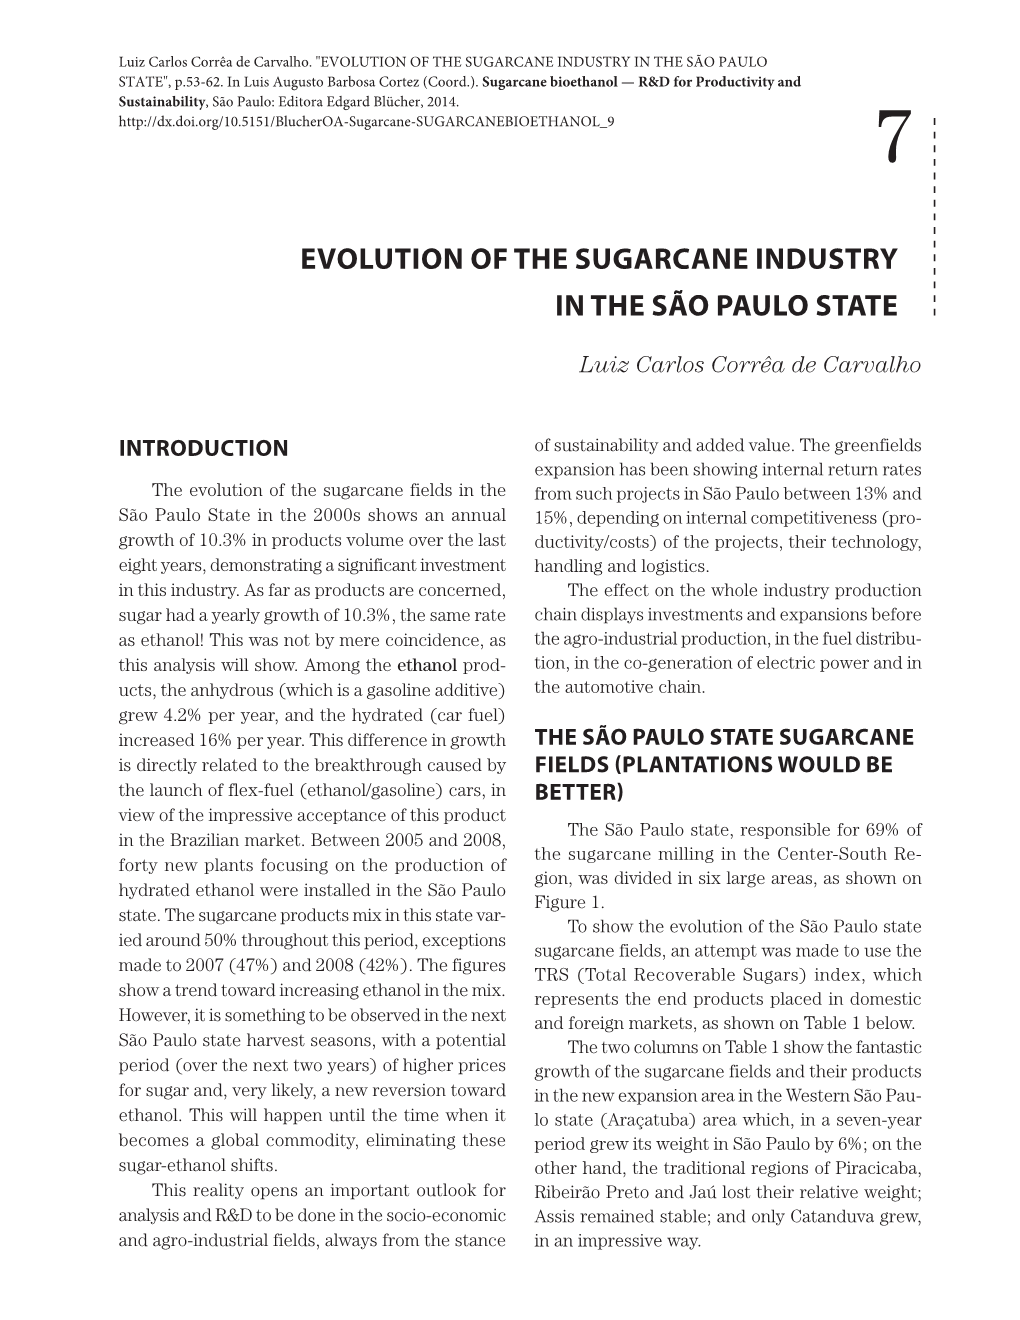 EVOLUTION of the SUGARCANE INDUSTRY in the SÃO PAULO STATE", P.53-62